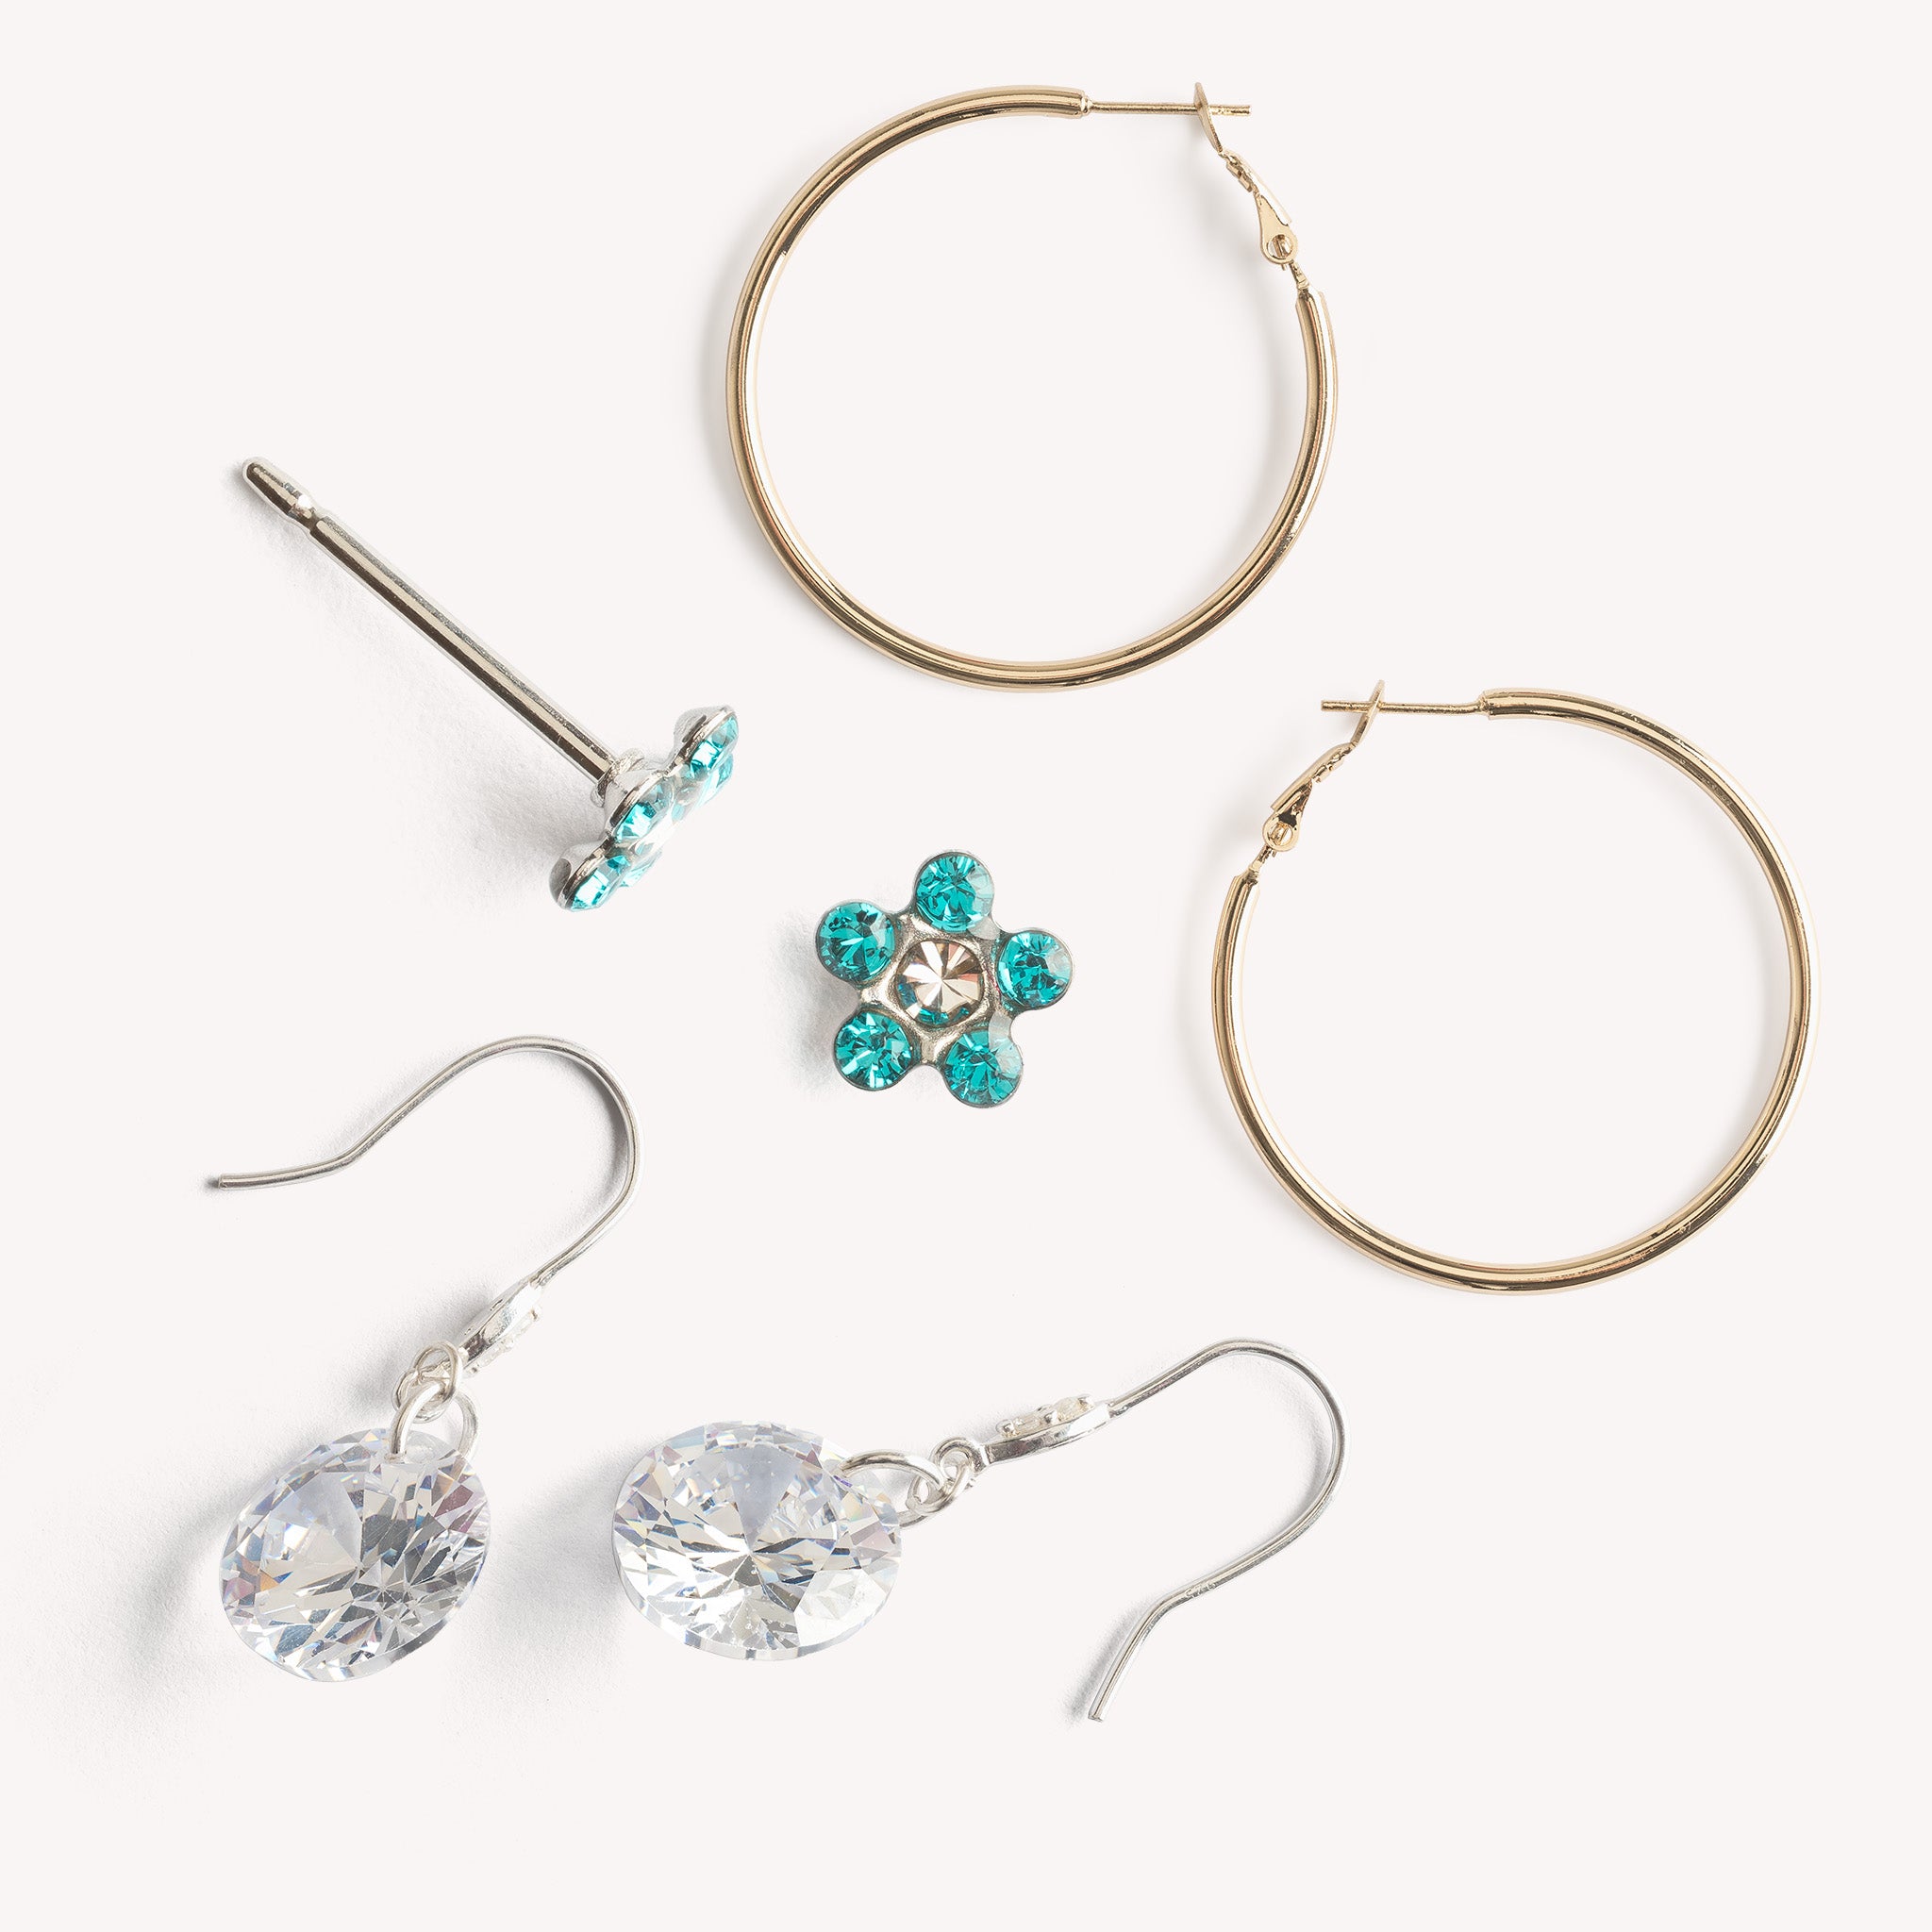 Ask the Strategist: Actually Cool Hypoallergenic Jewelry